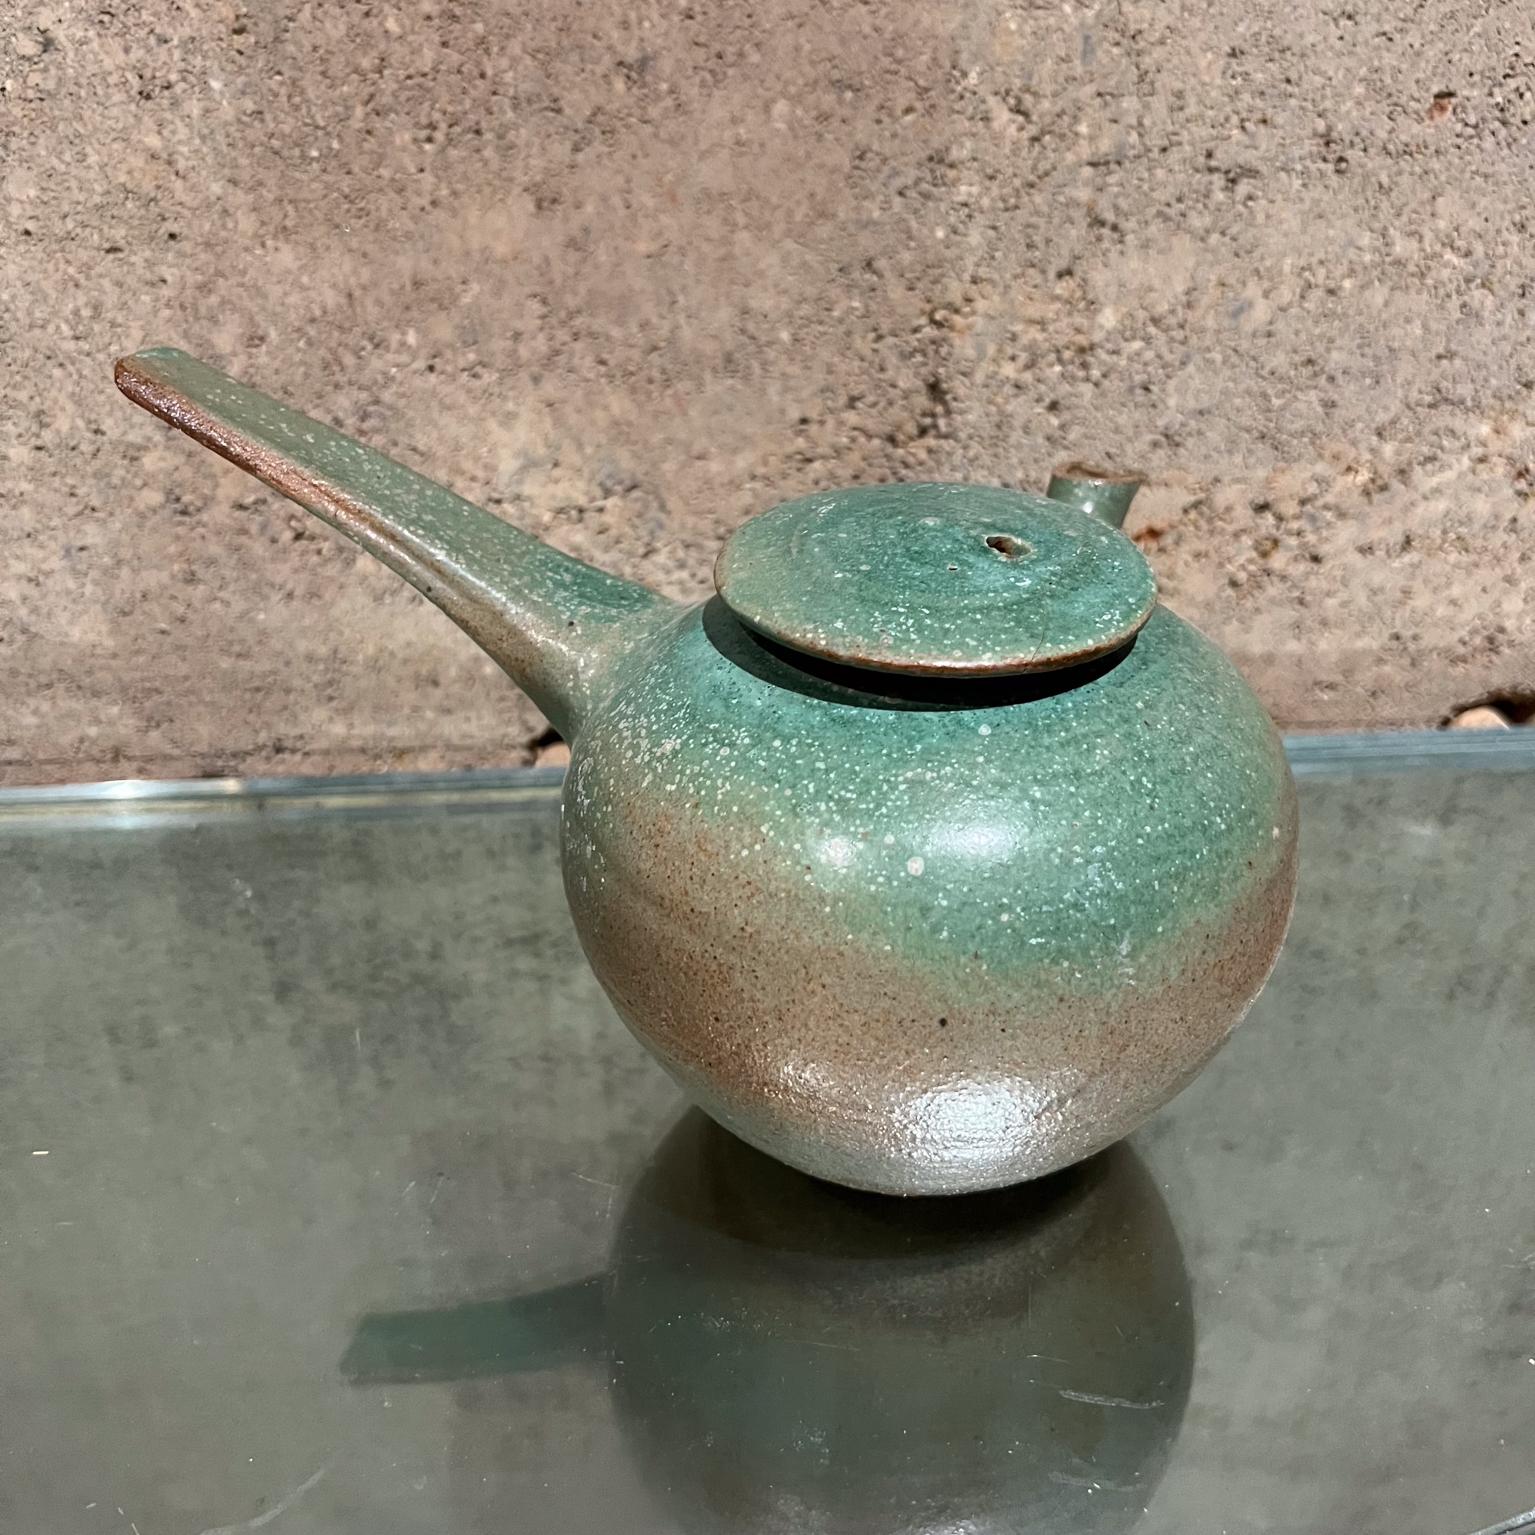 Old Art Pottery Japanese Modern Green Tea Pot
artist signed
5 tall x 6 d x 8.5 w
Original preowned condition. Distress crack present.
Please review all images for condition.